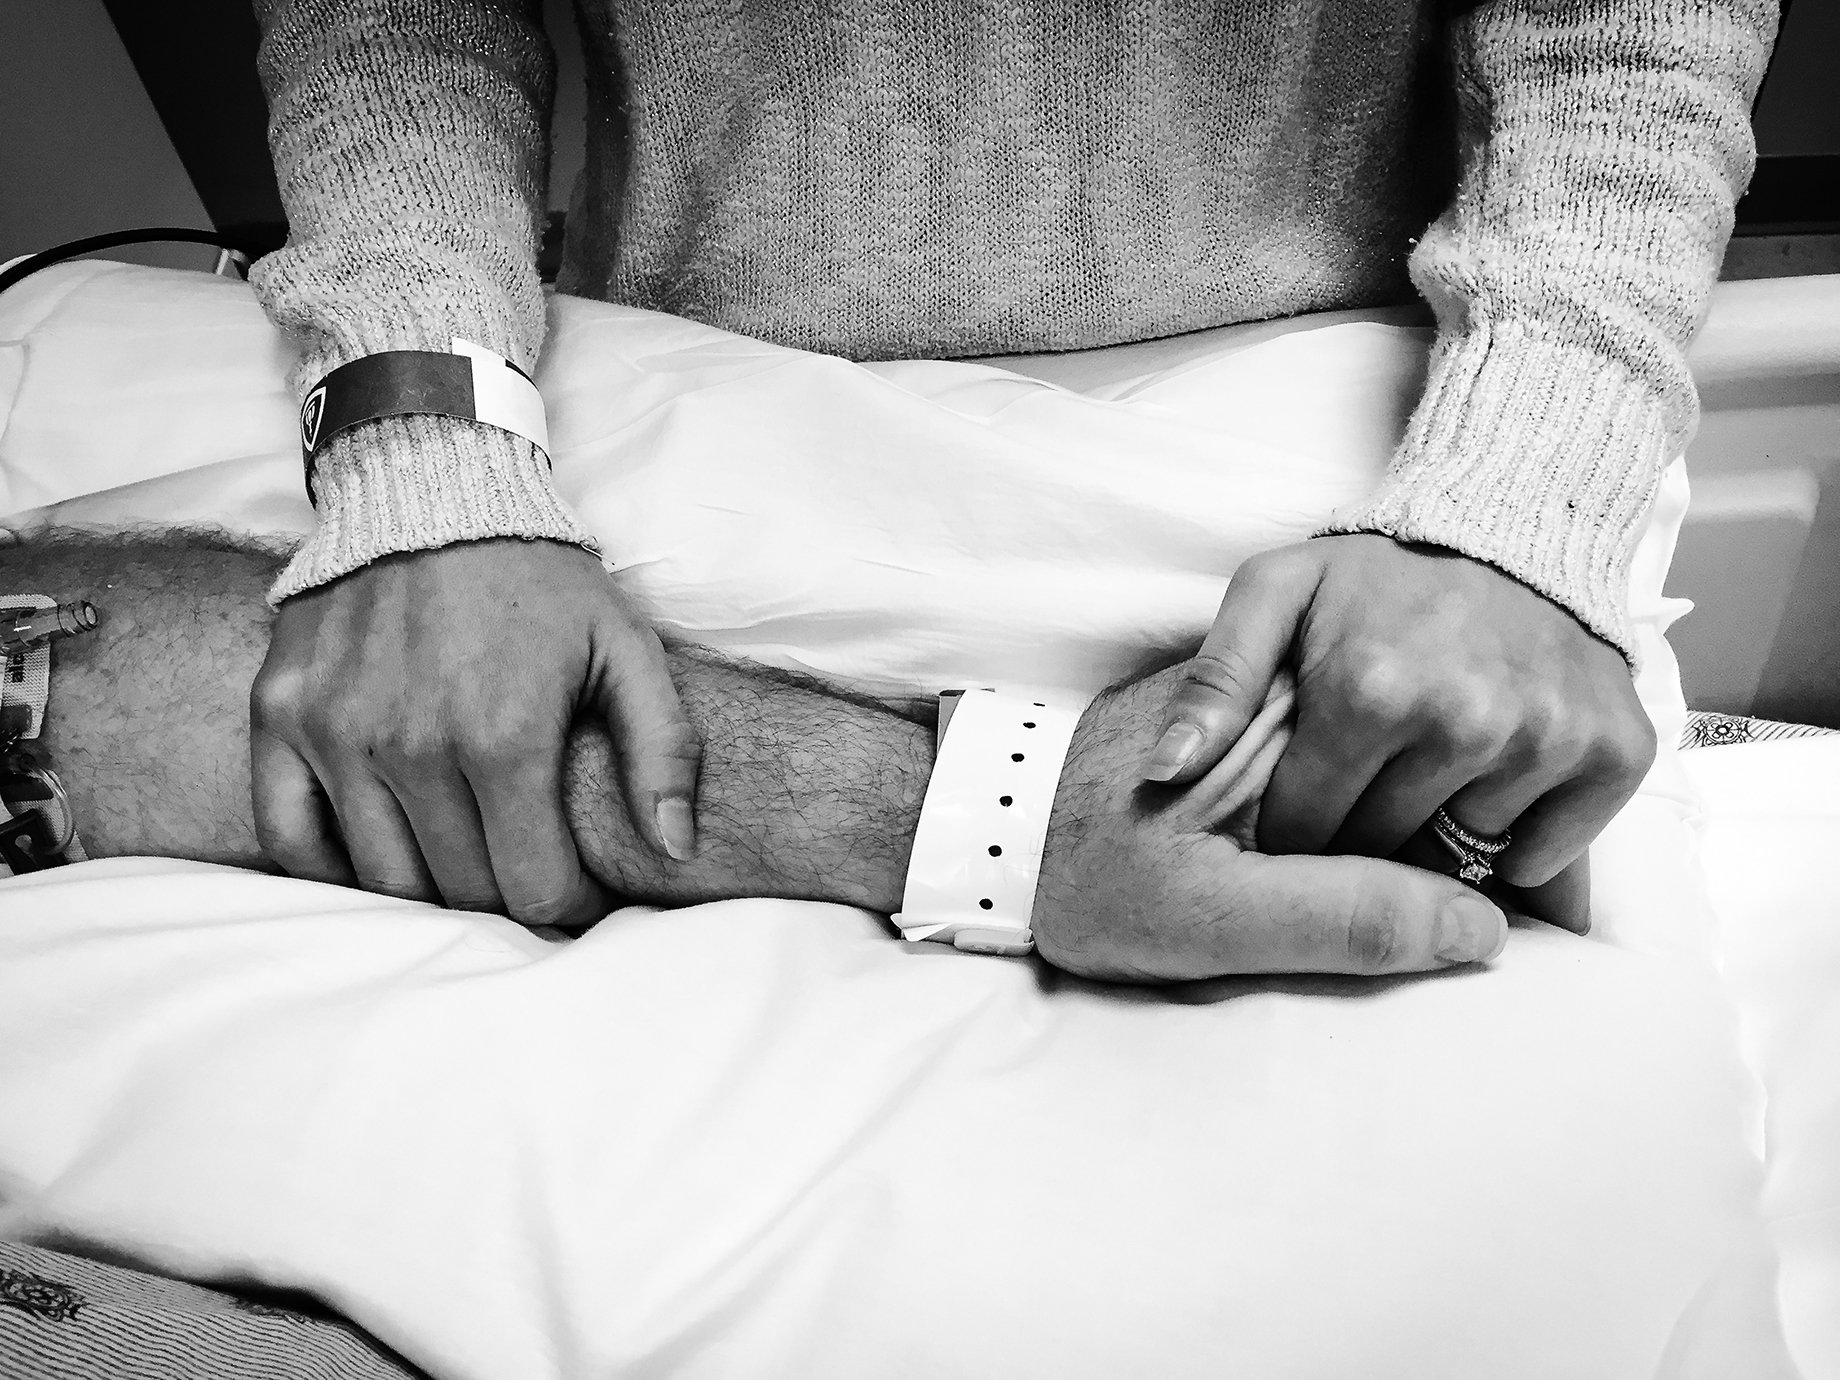 Photographer Sean Scheidt's sister holding their Uncle's hand in a hospital bed shot in black and white